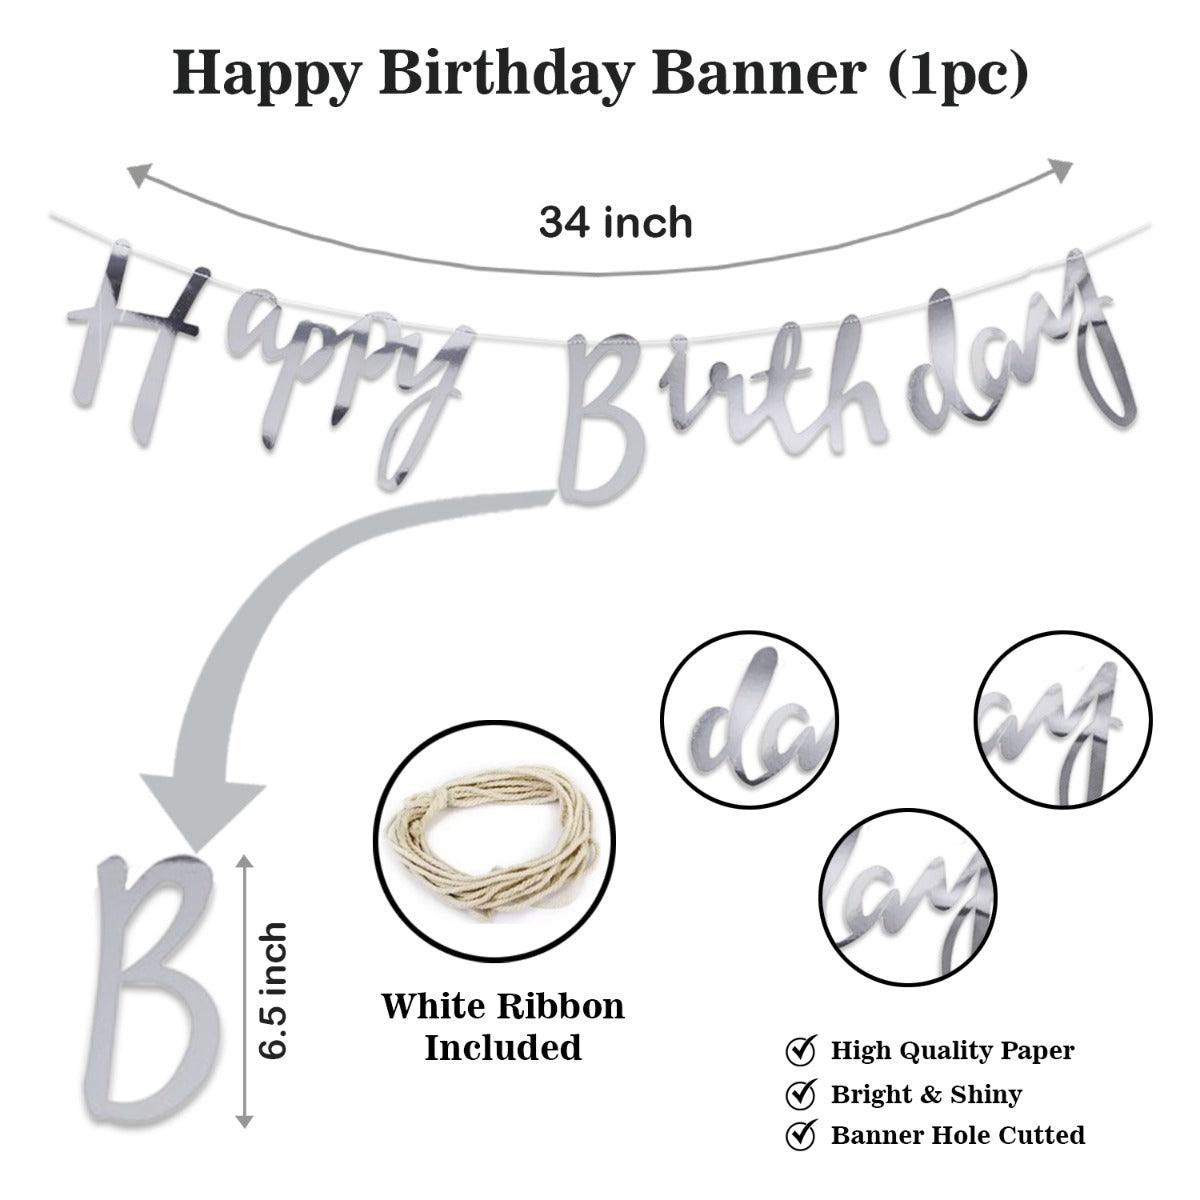 PartyCorp Happy Birthday Decoration Kit Combo 45 Pcs - Gold, Copper & White Chrome & Confetti Balloons, Silver Happy Birthday Banner, Black Curtain, Sliver Star Foil, Cheers Beer Mug Foil Balloons